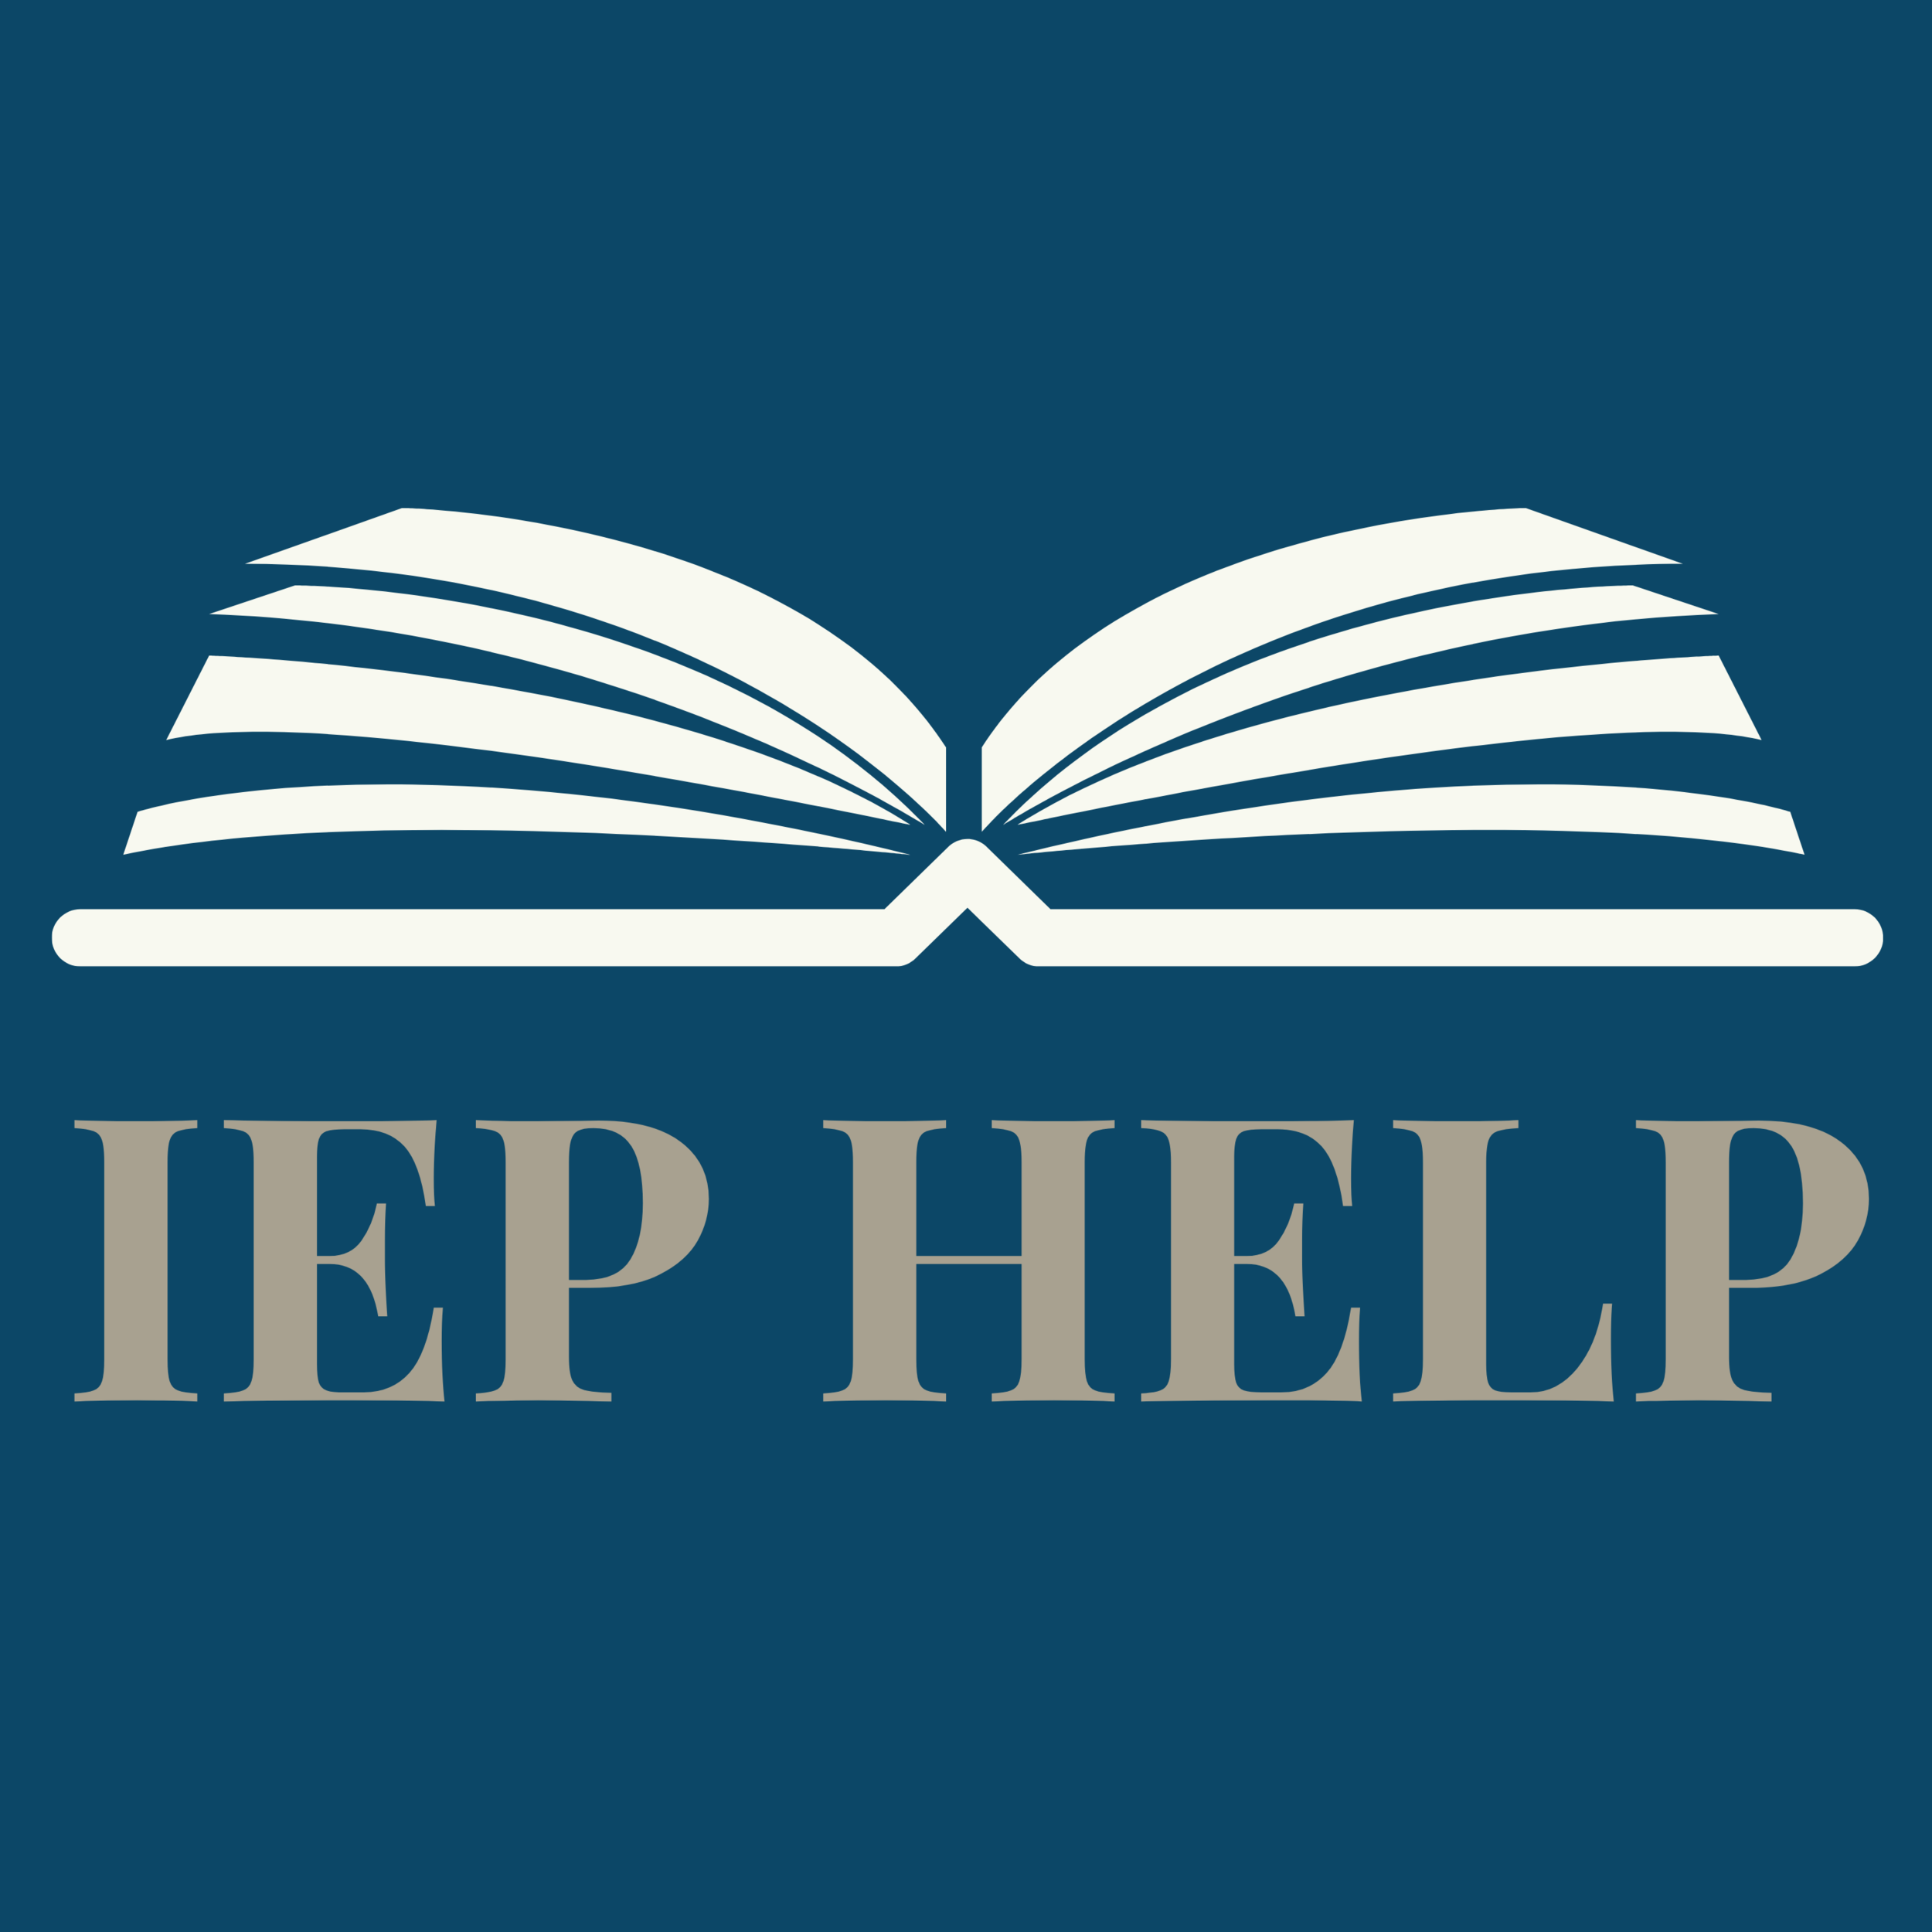 Home - Your IEP Support